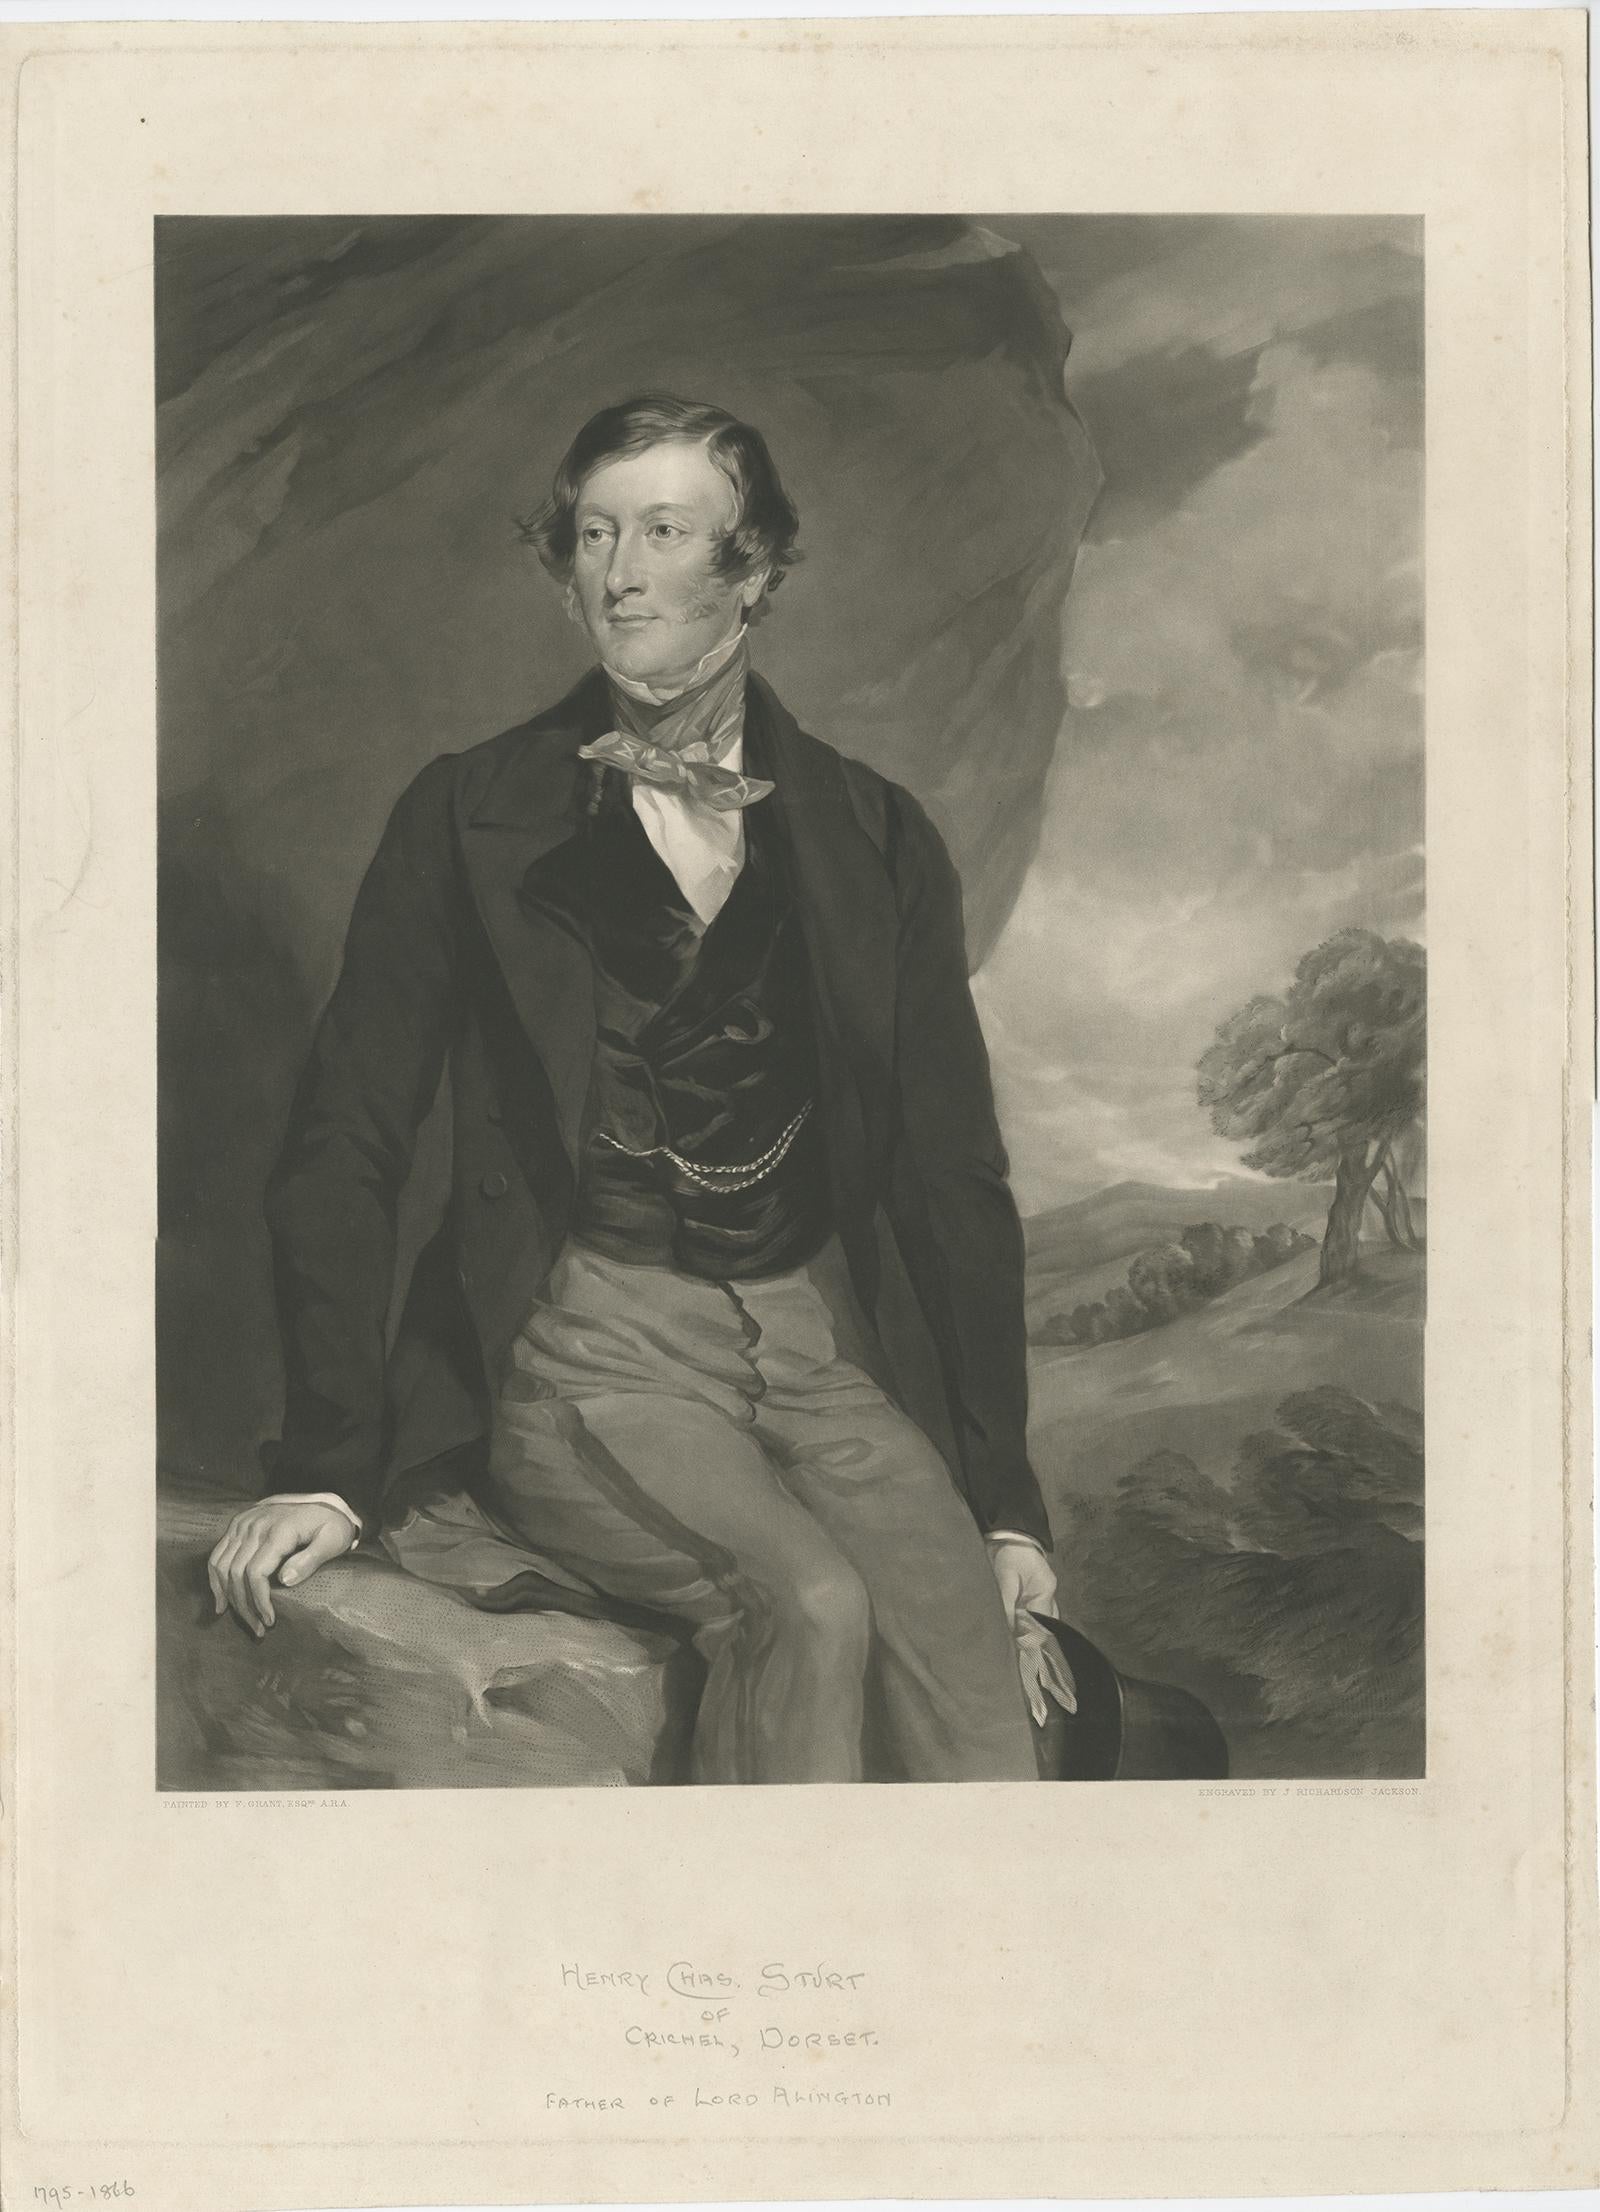 Antique mezzotint of Henry Charles Sturt, with handwritten titles. Henry Charles Sturt of Crichel House, Dorset, was a British landowner and politician. 

Artists and engravers: Engraved by J. Richardson Jackson after a painting by F. Grant.

Henry